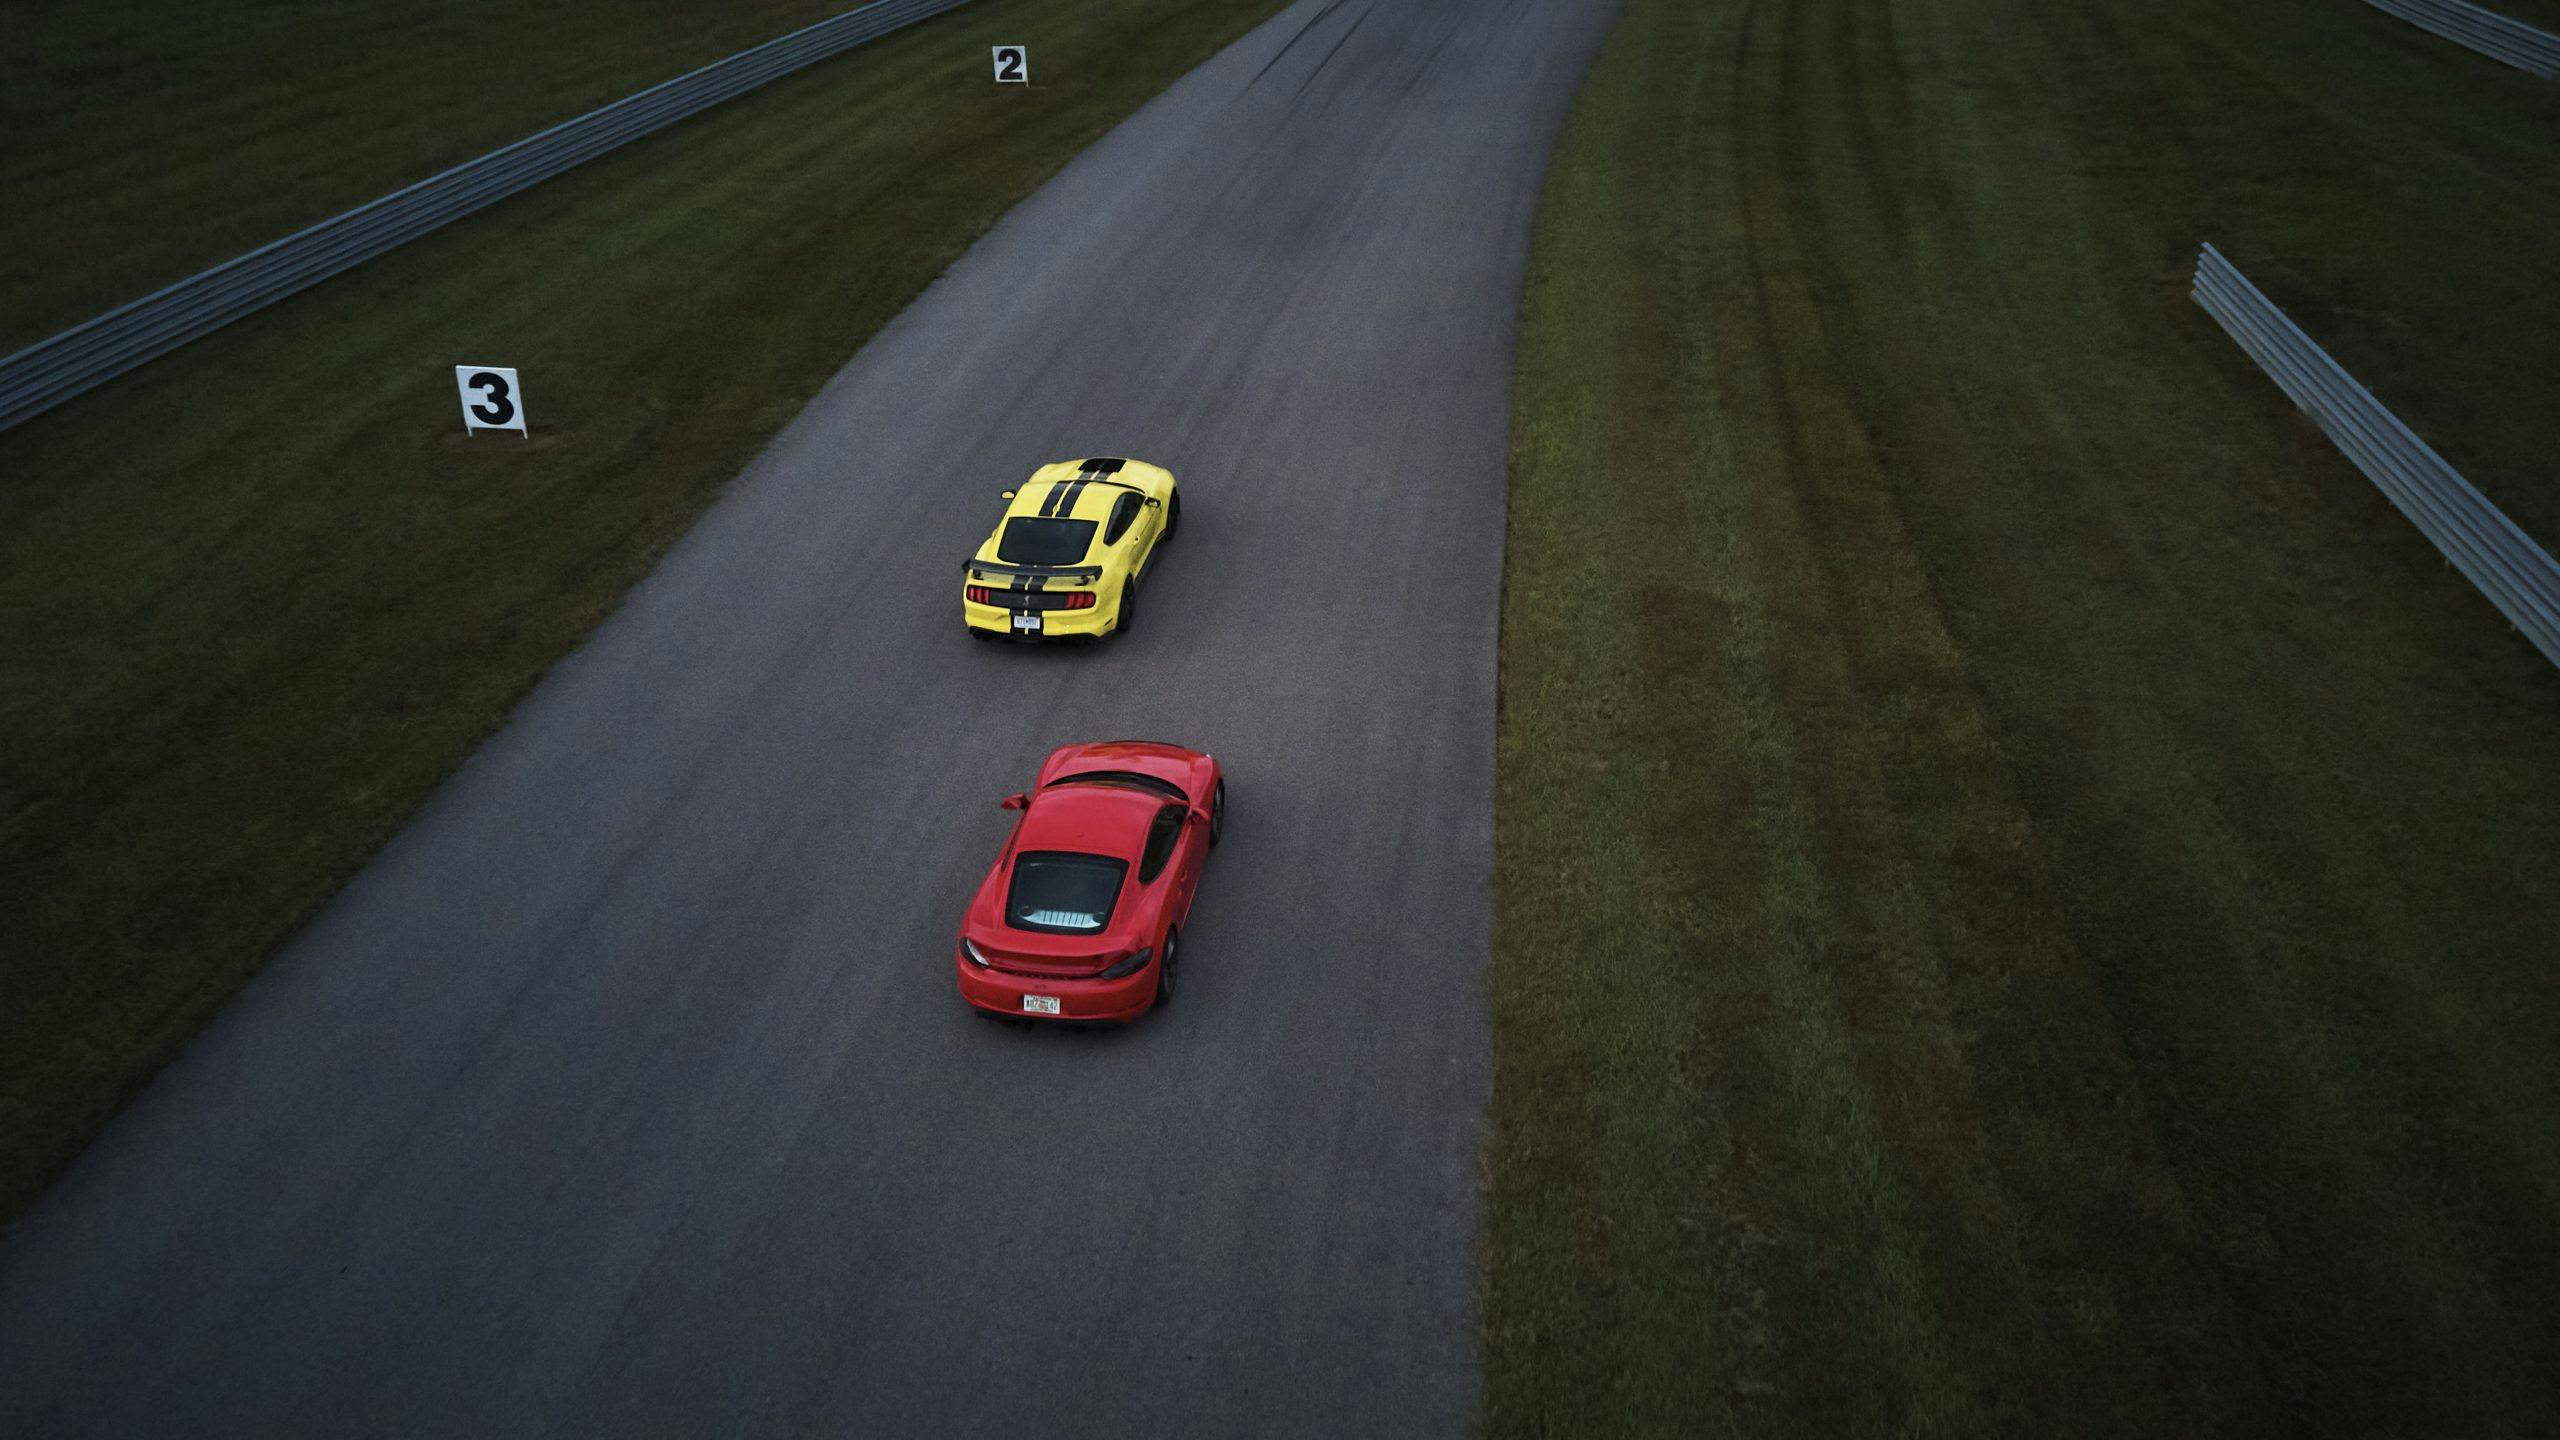 NCM Ford Mustang Shelby GT500 and Porsche Cayman GT4 drone aerial